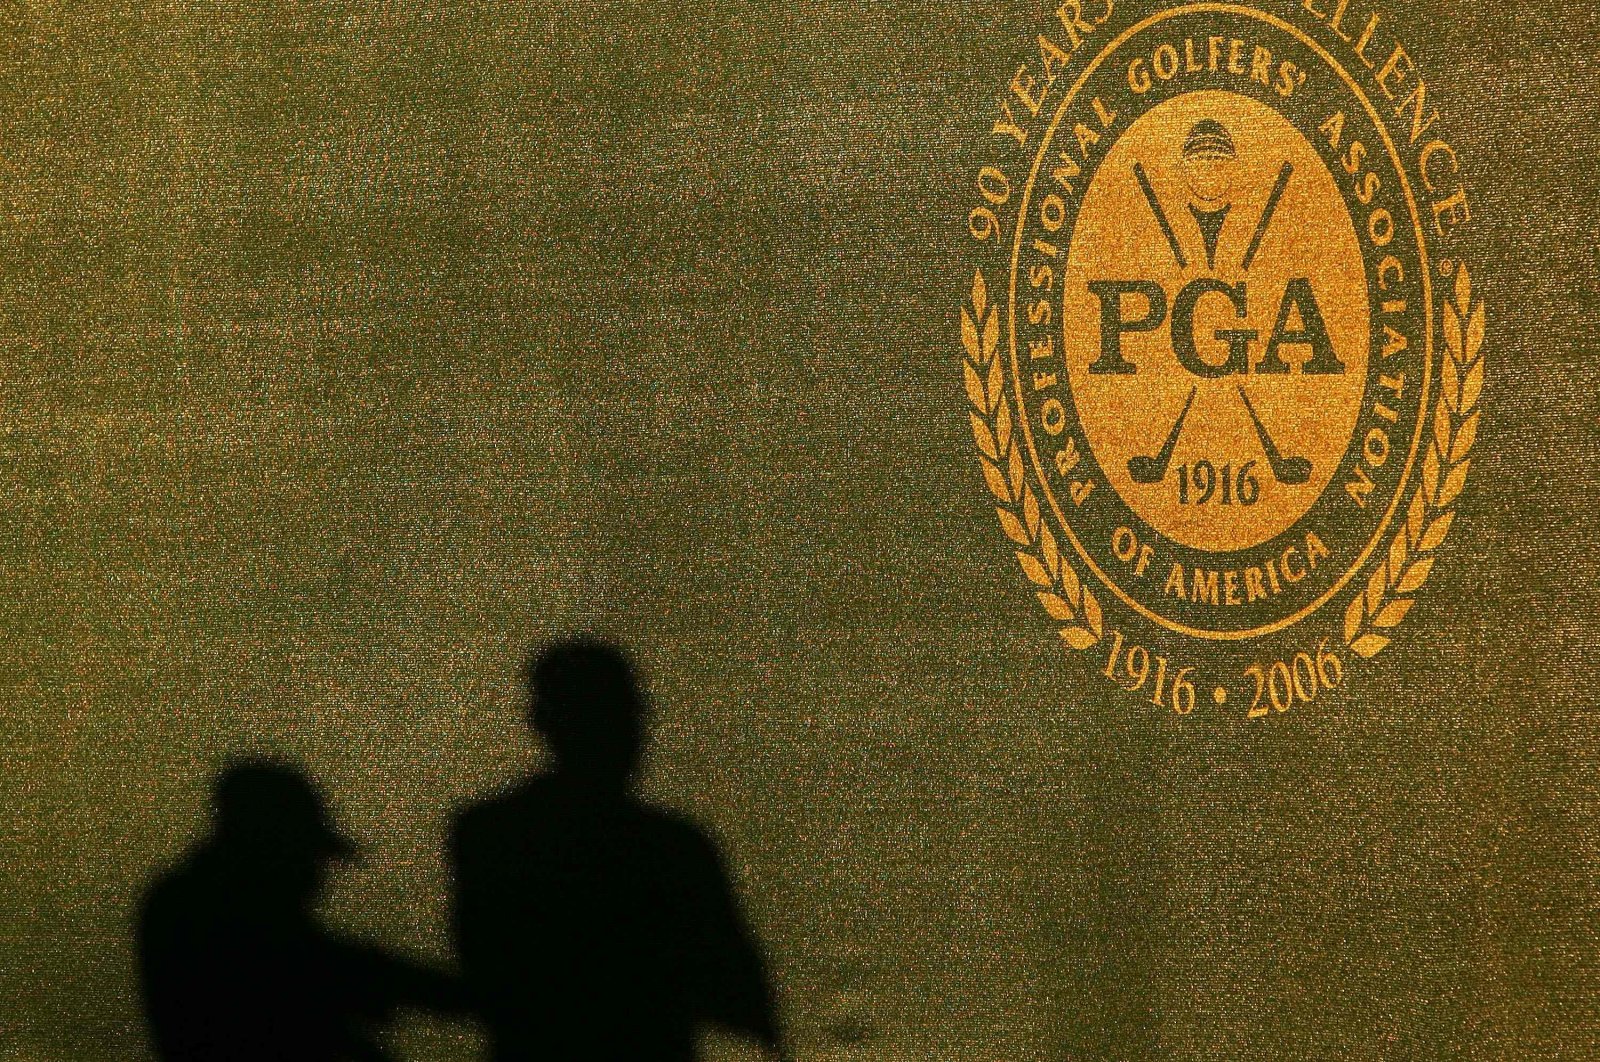 Two shadows of grounds crew are seen on the wall near the PGA logo during practice for the 2006 PGA Championship at Medinah Country Club in Medinah, U.S., Aug. 16, 2006. (AFP Photo)